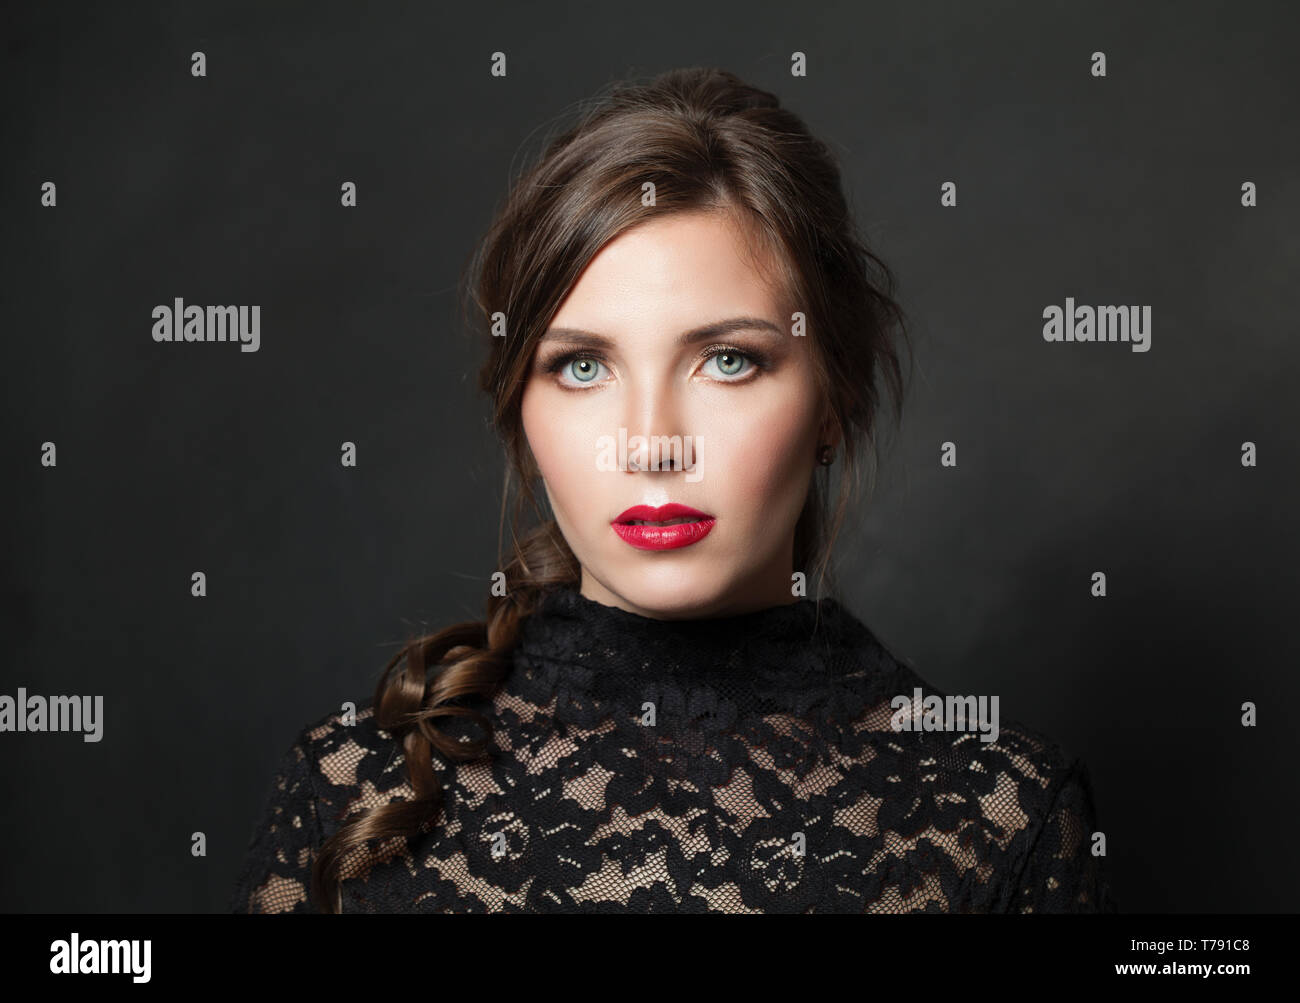 Pretty woman with red lips makeup hair on black background Stock Photo